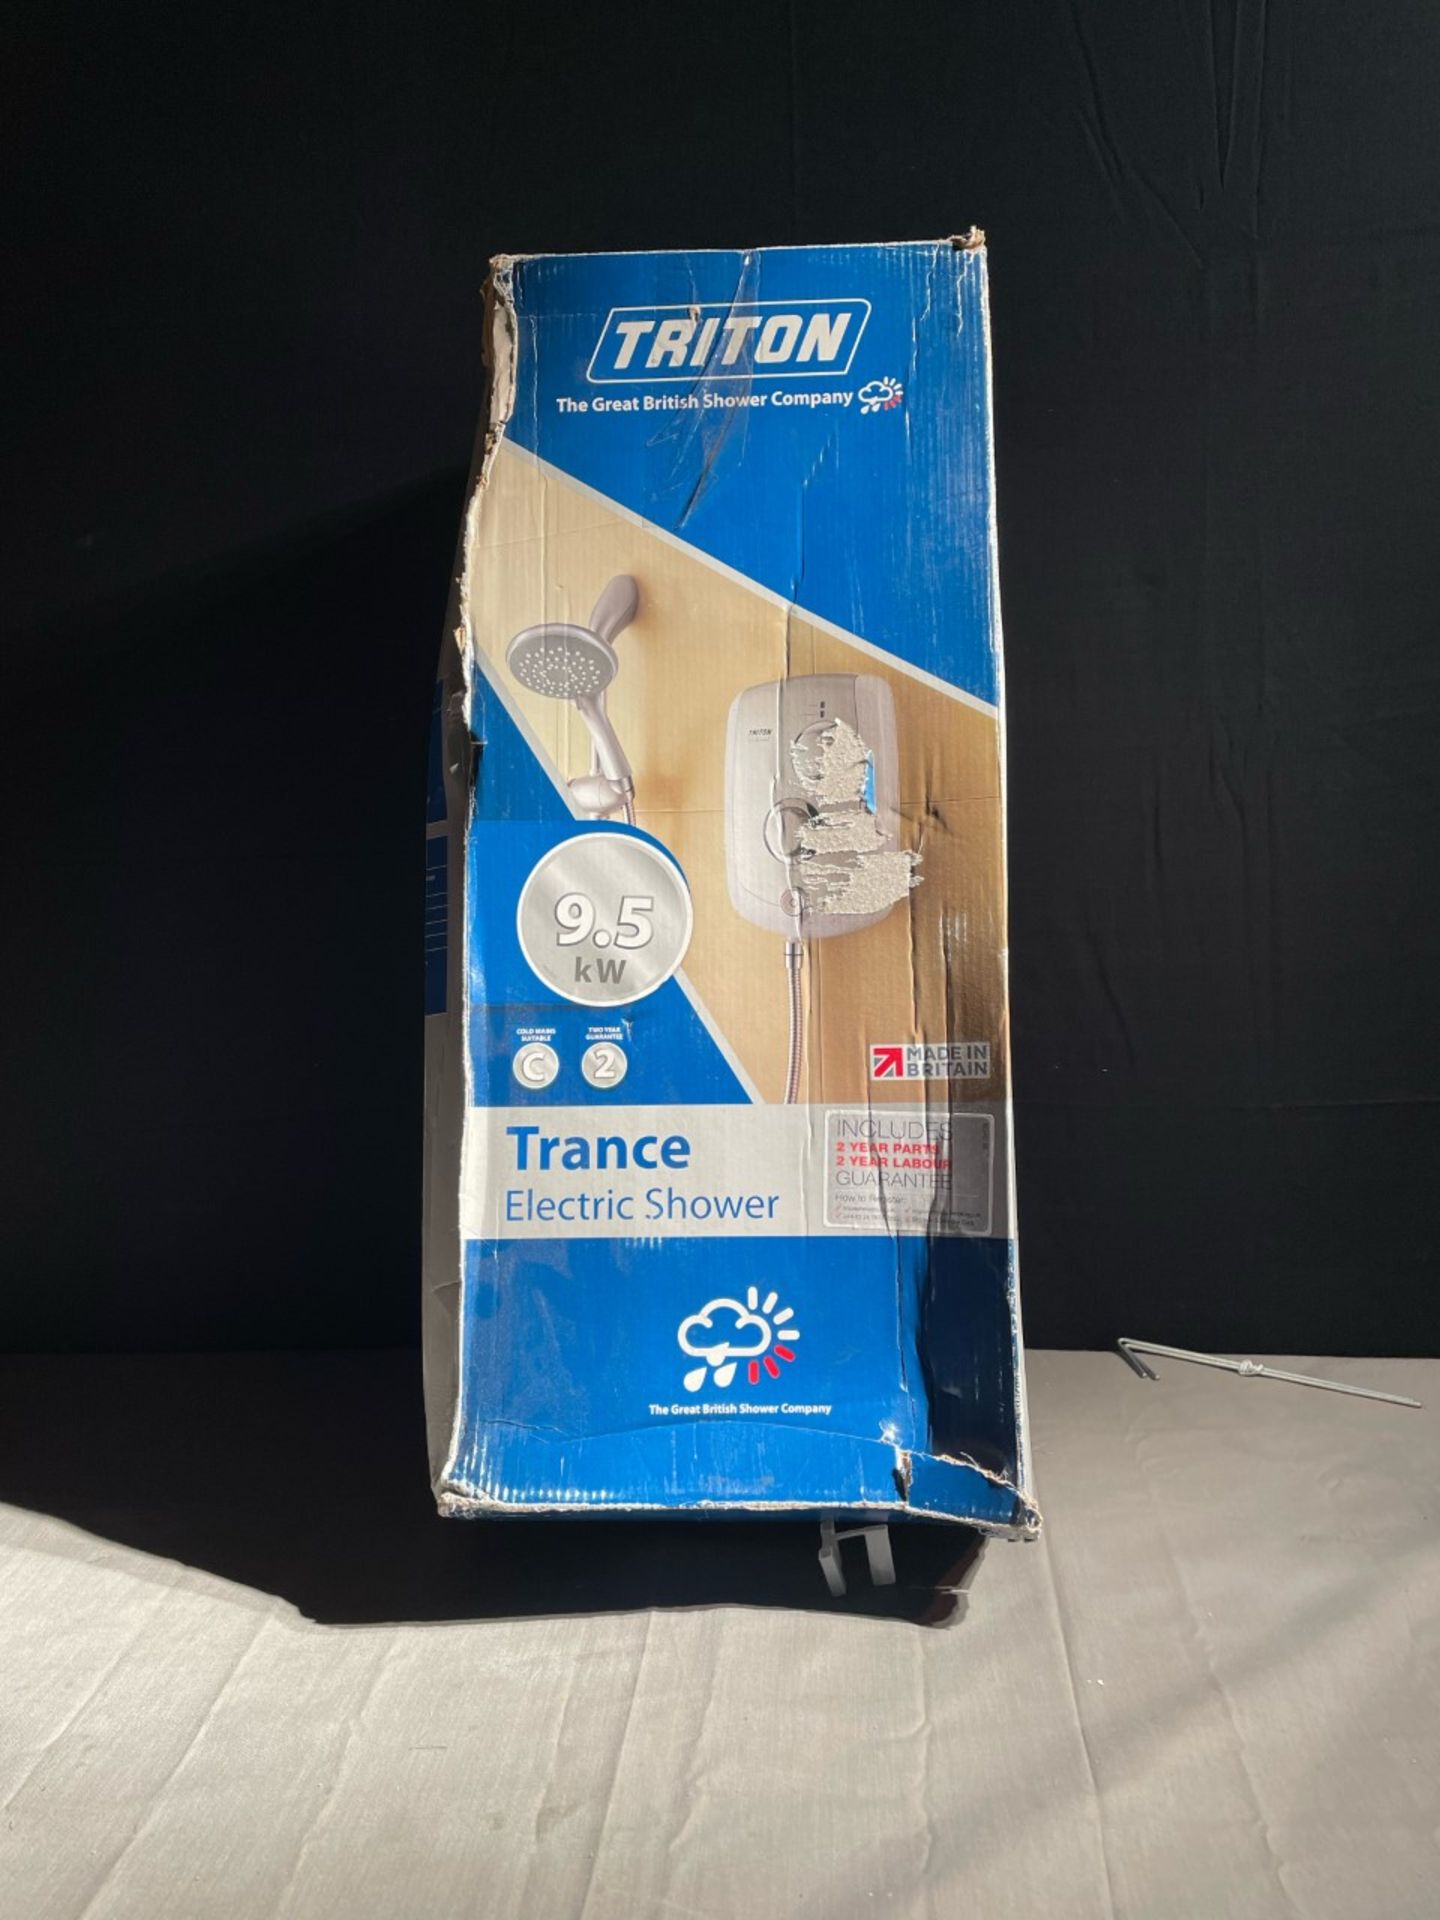 Triton trance 9.5kw electric shower. Unit is new in box. Working order is unknown